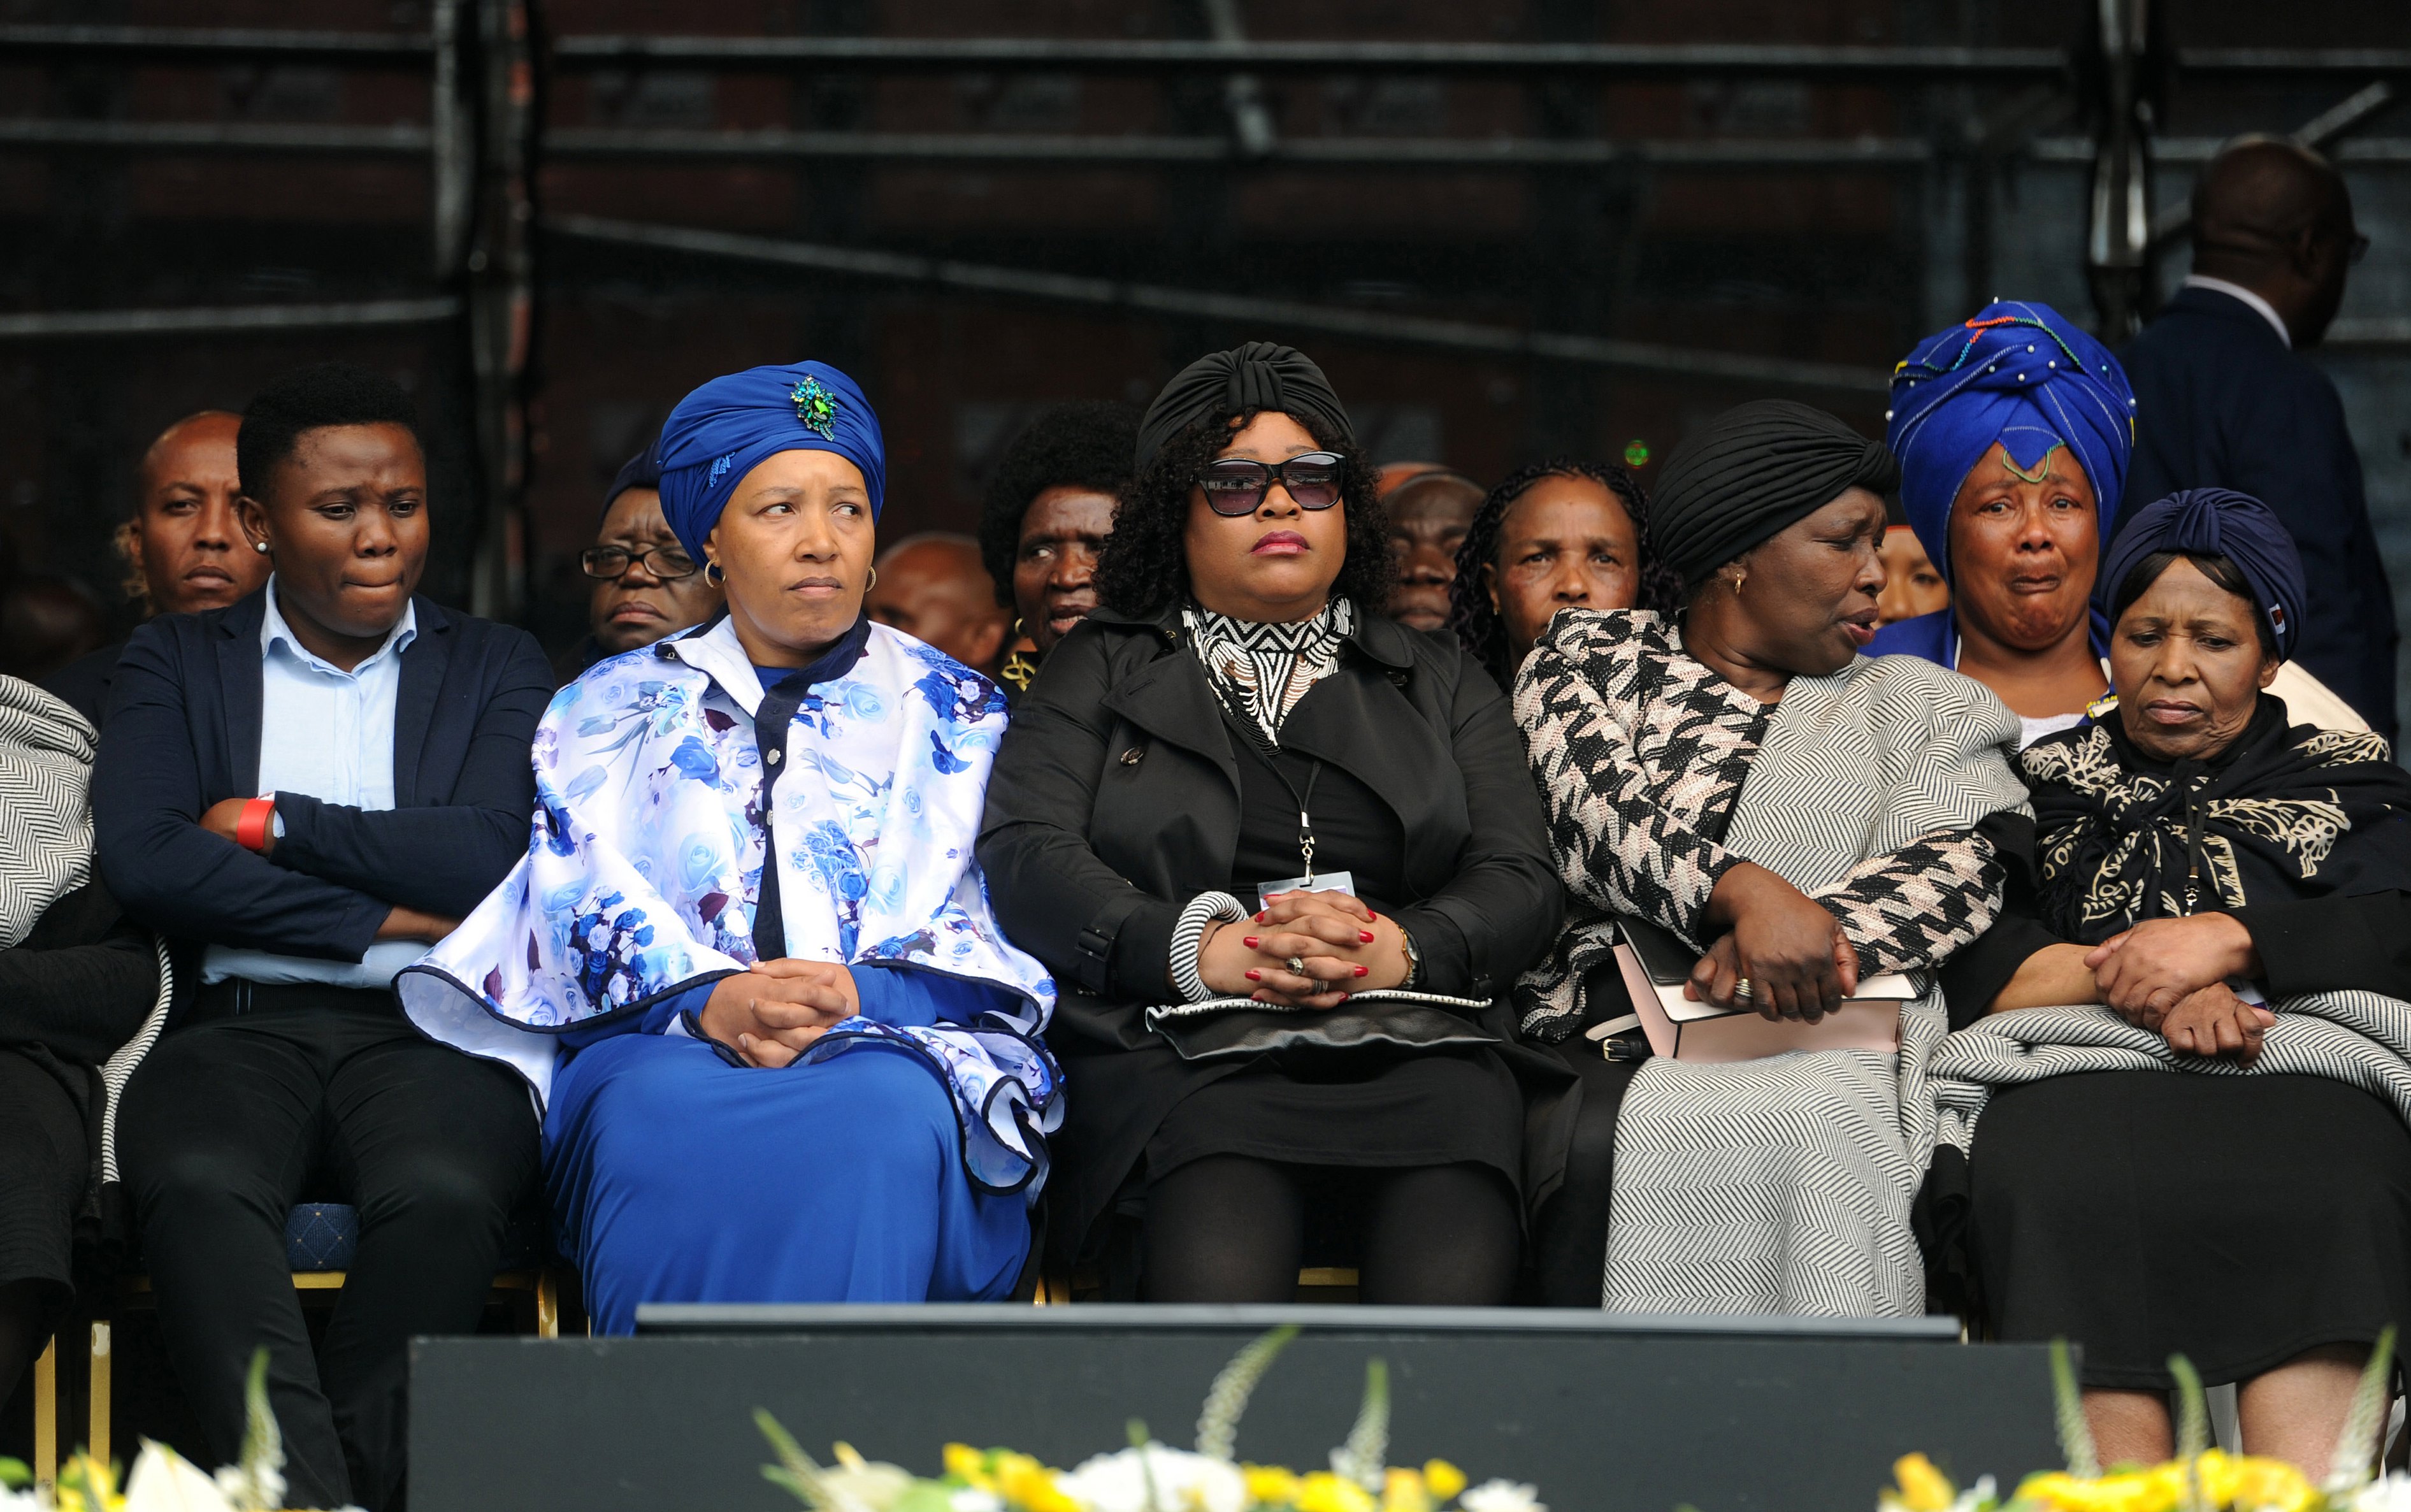 epa06660952 Winnie Madikizela-Mandela's daughters Zanani (2-L) and Zindzi (3-L) with family members attend the memorial service of Winnie Madikizela-Mandela at the Orlando stadium in Soweto, South Africa, 11 April 2018. Winnie Mandela, former wife of Nelson Madela and anti-apartheid activist, passed away in a Johannesburg hospital on 02 April 2018 at age 81. South African President Cyril Ramaphosa declared 10 days of national mourning for the late Winnie Madikizela-Mandela and ordered an official memorial and state funeral in her honor which will take place 11 and 14 April.  EPA/STR